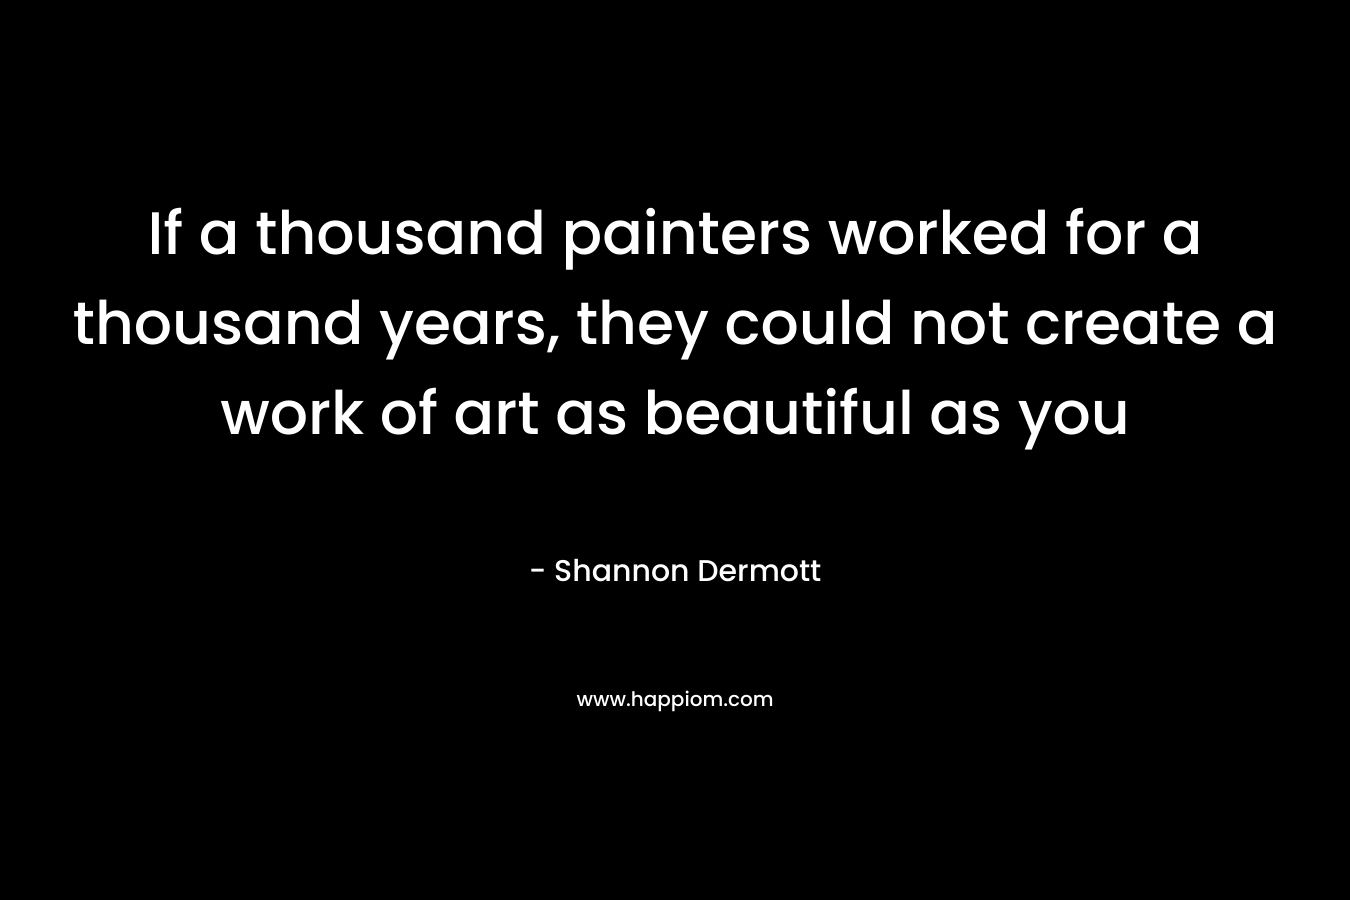 If a thousand painters worked for a thousand years, they could not create a work of art as beautiful as you – Shannon Dermott